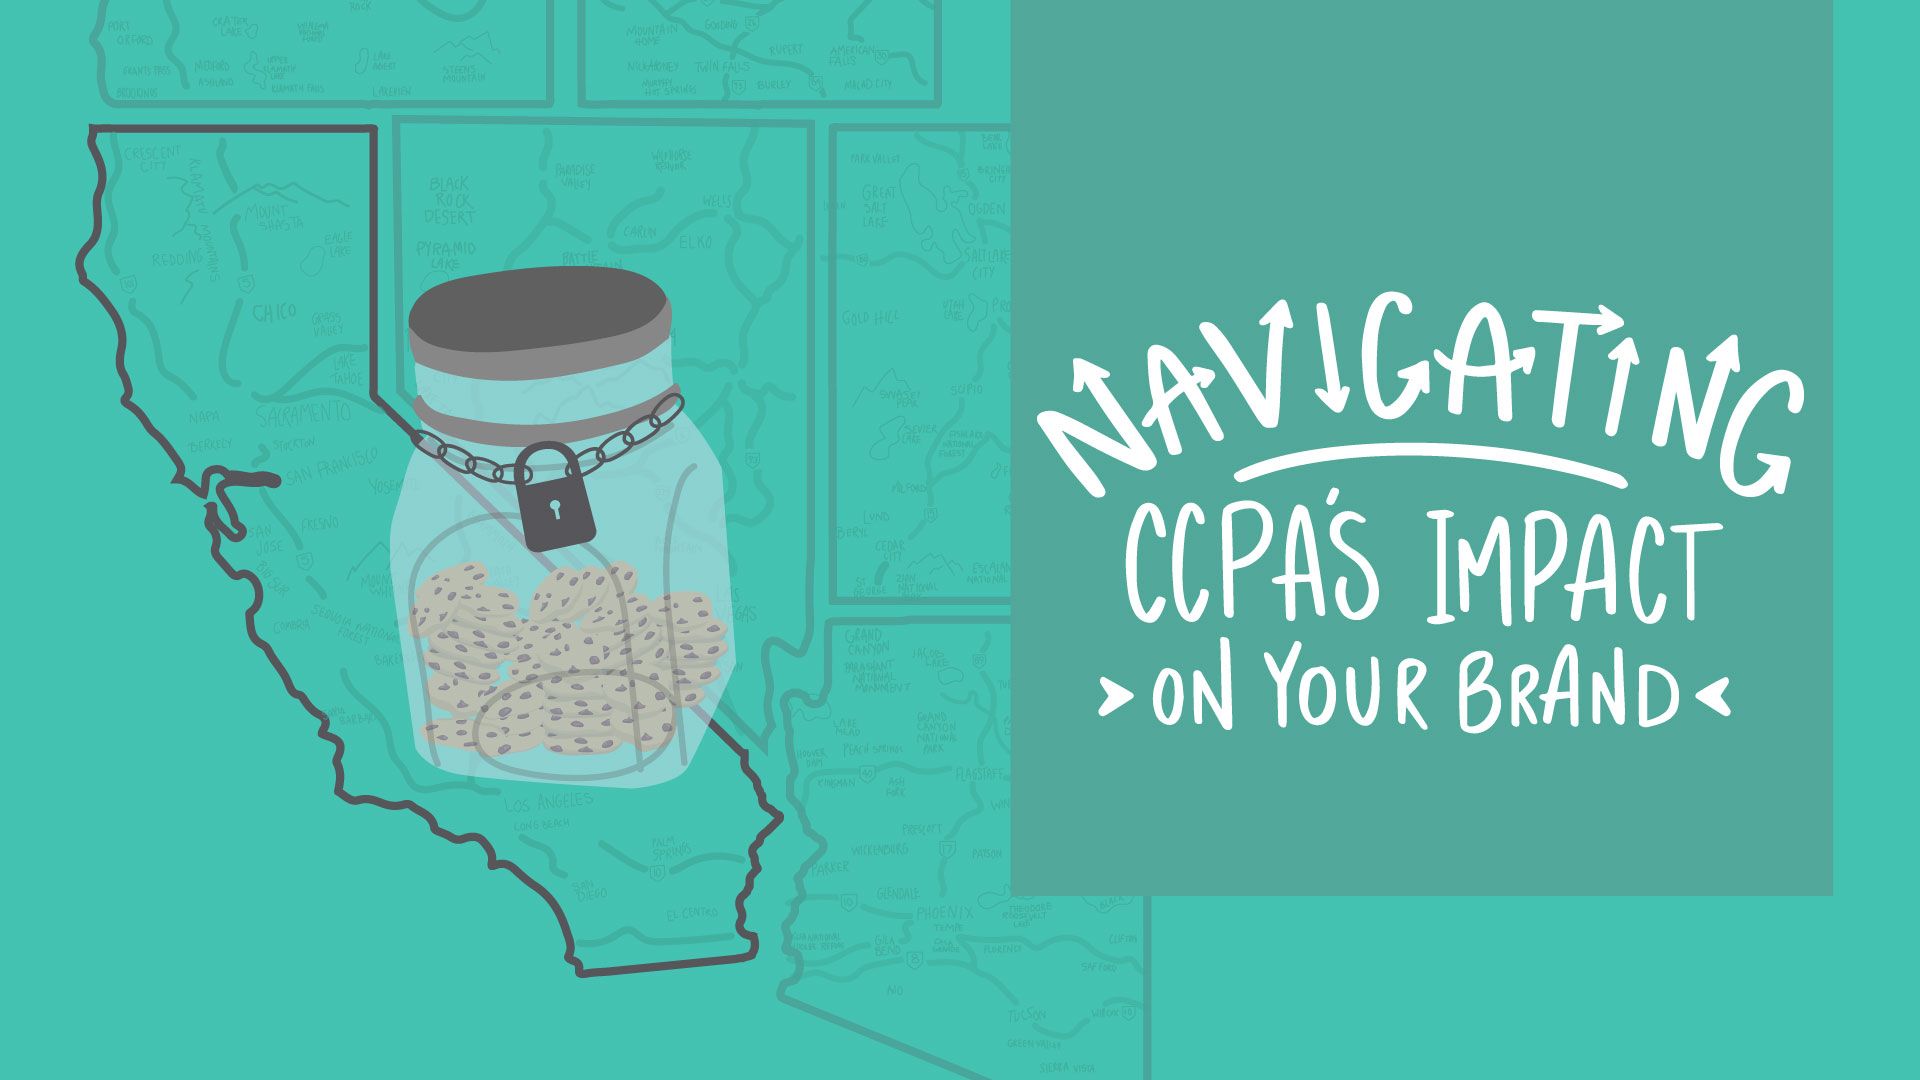 Article Image - Navigating CCPA’s Impact on Your Brand